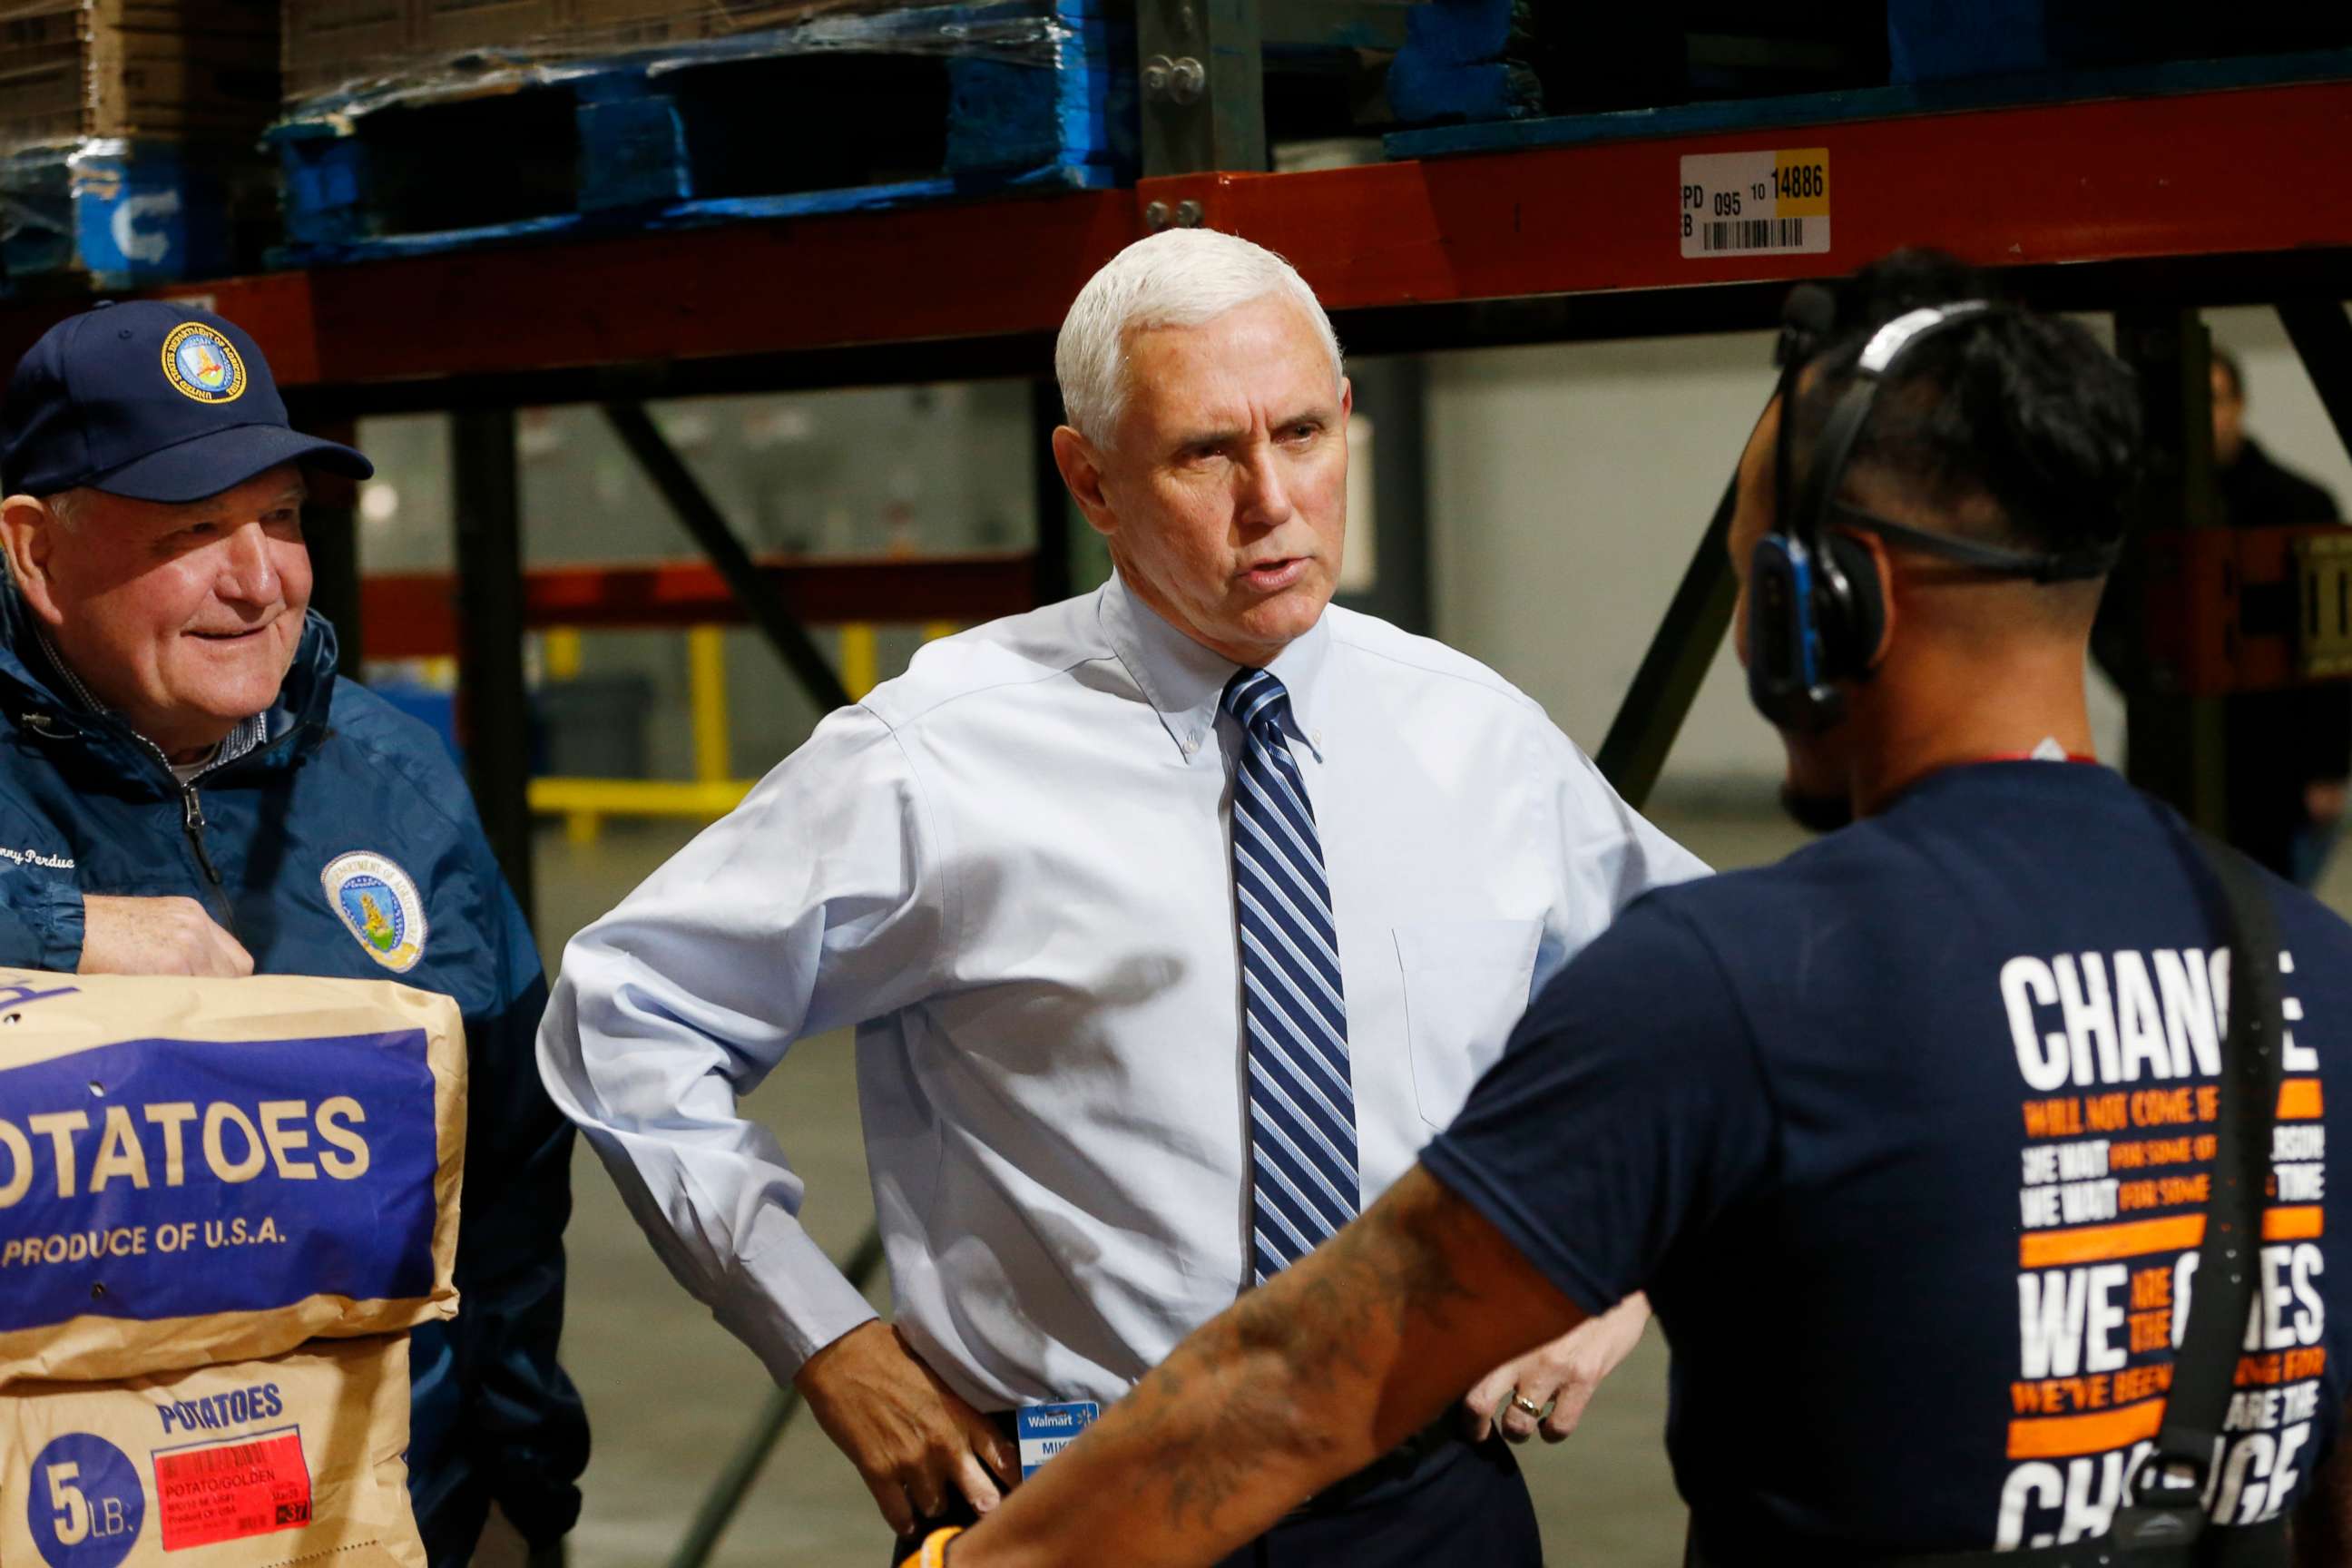 PHOTO: Vice President Mike Pence talks with order picker Bin Sam as Agriculture Secretary Sonny Purdue listens during a tour of a Walmart Distribution Center, April 1, 2020, in Gordonsville, Va.